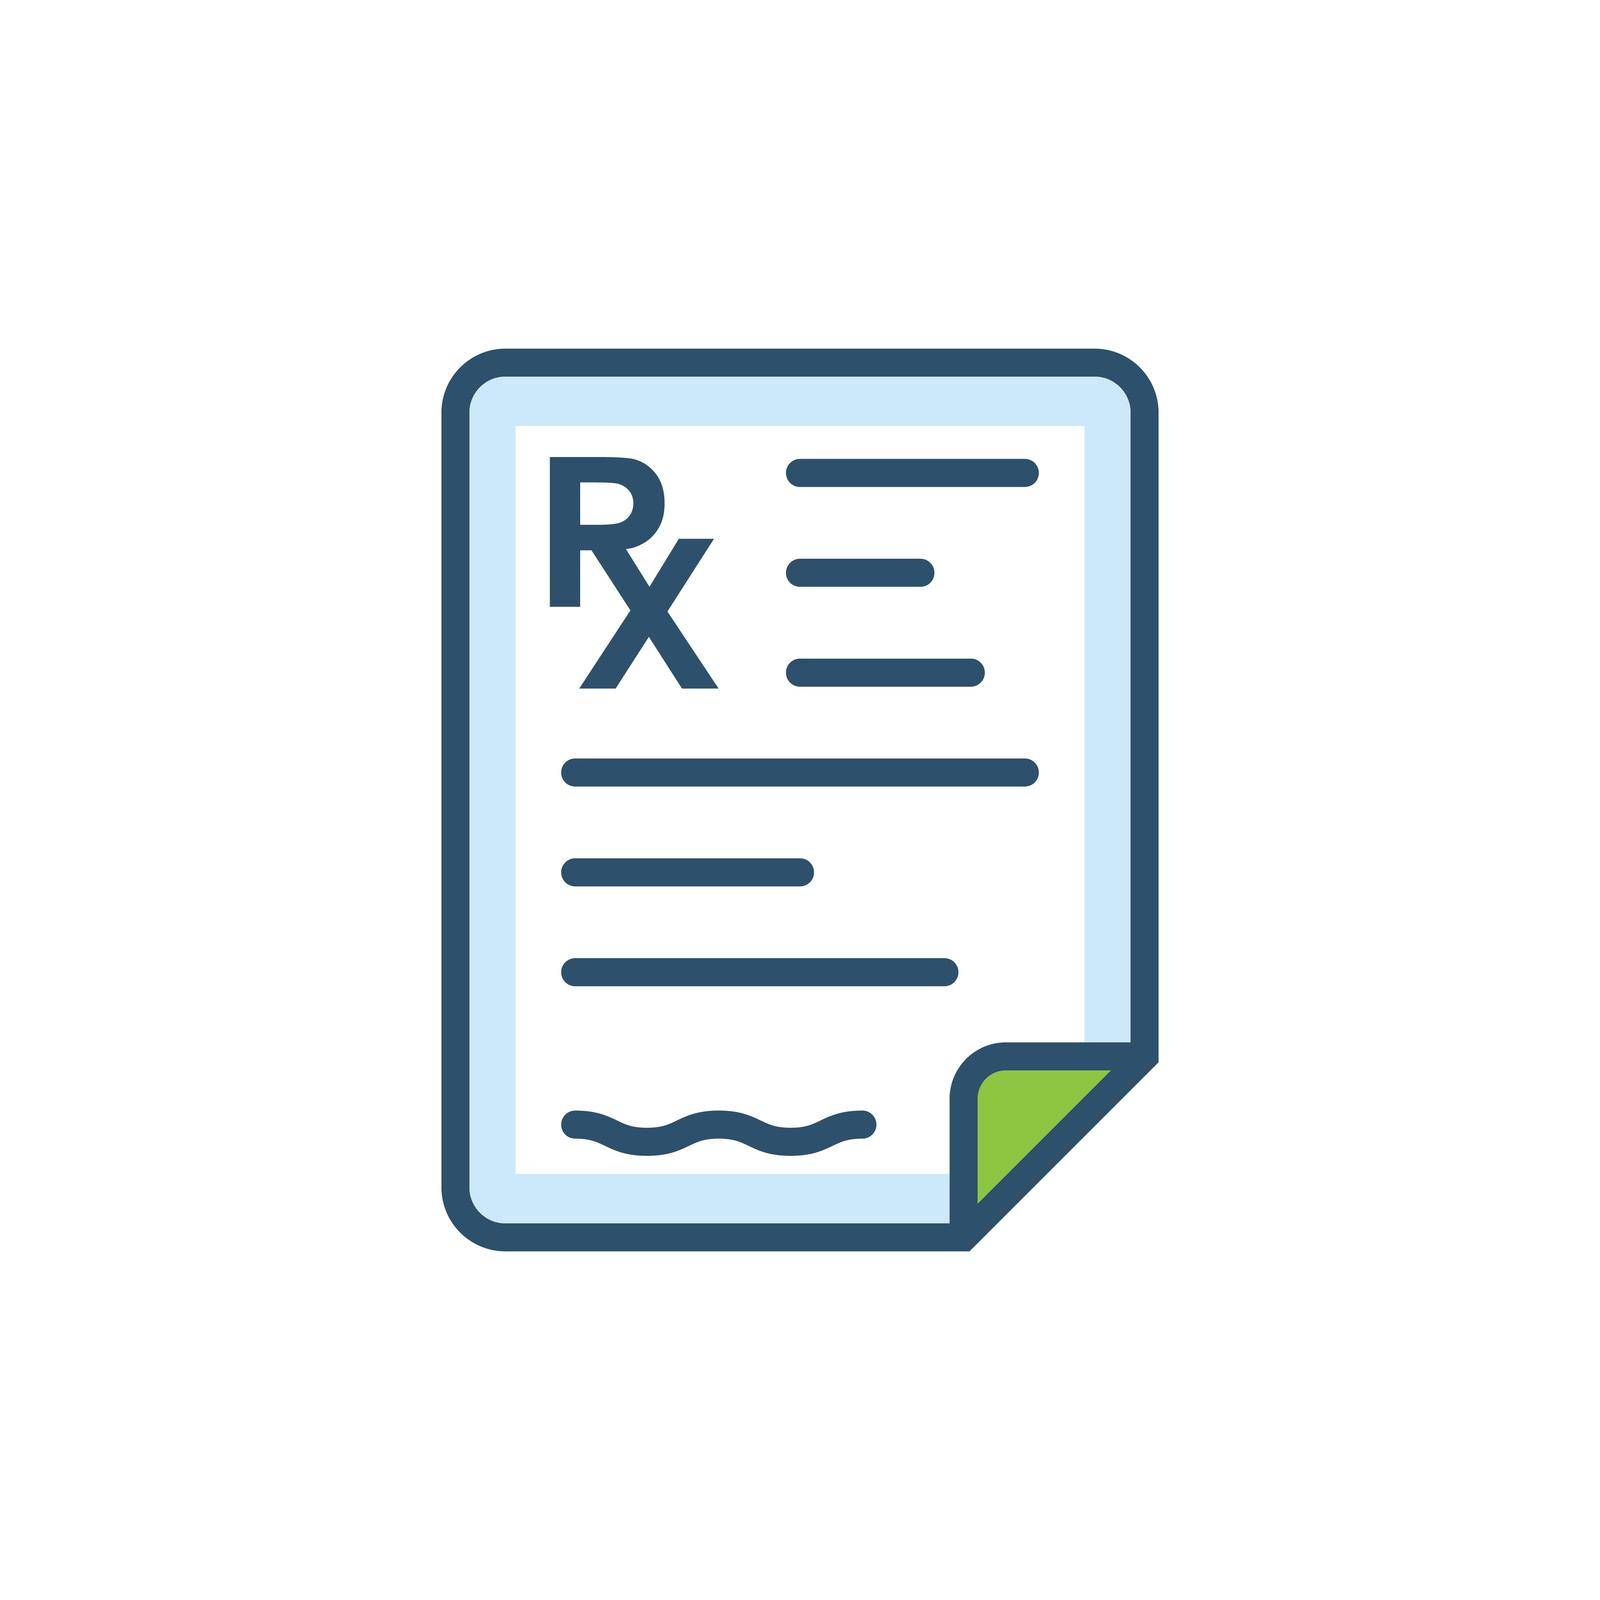 Medical prescription pad icon in flat style. Rx form vector illustration on isolated background. Doctor document sign business concept.